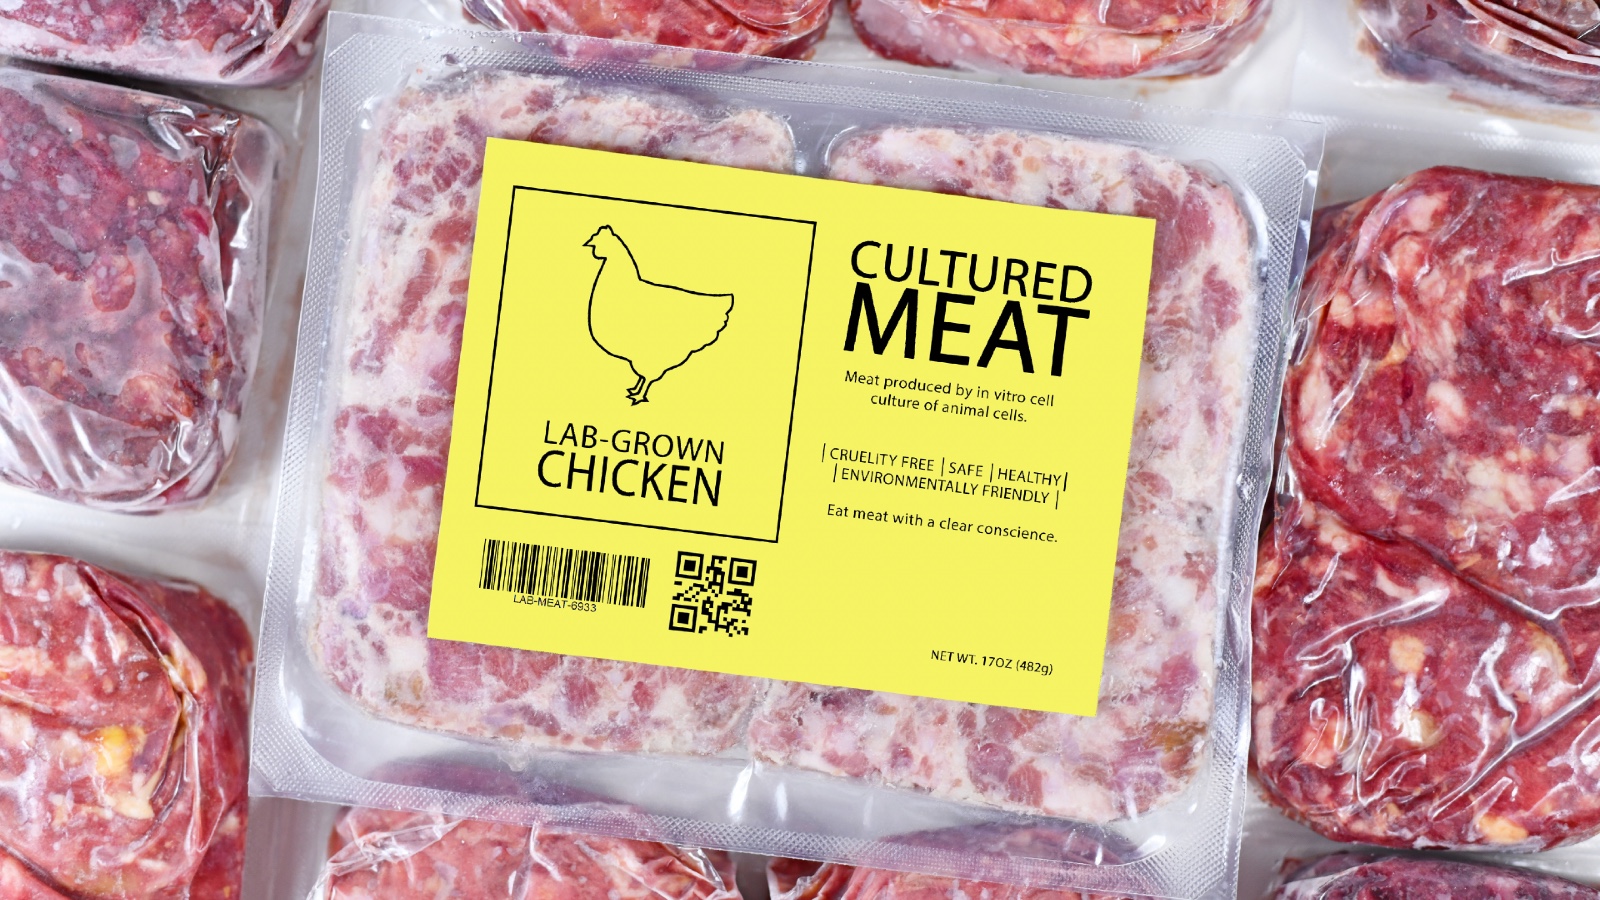 A plastic-wrapped package of frozen lab-grown chicken